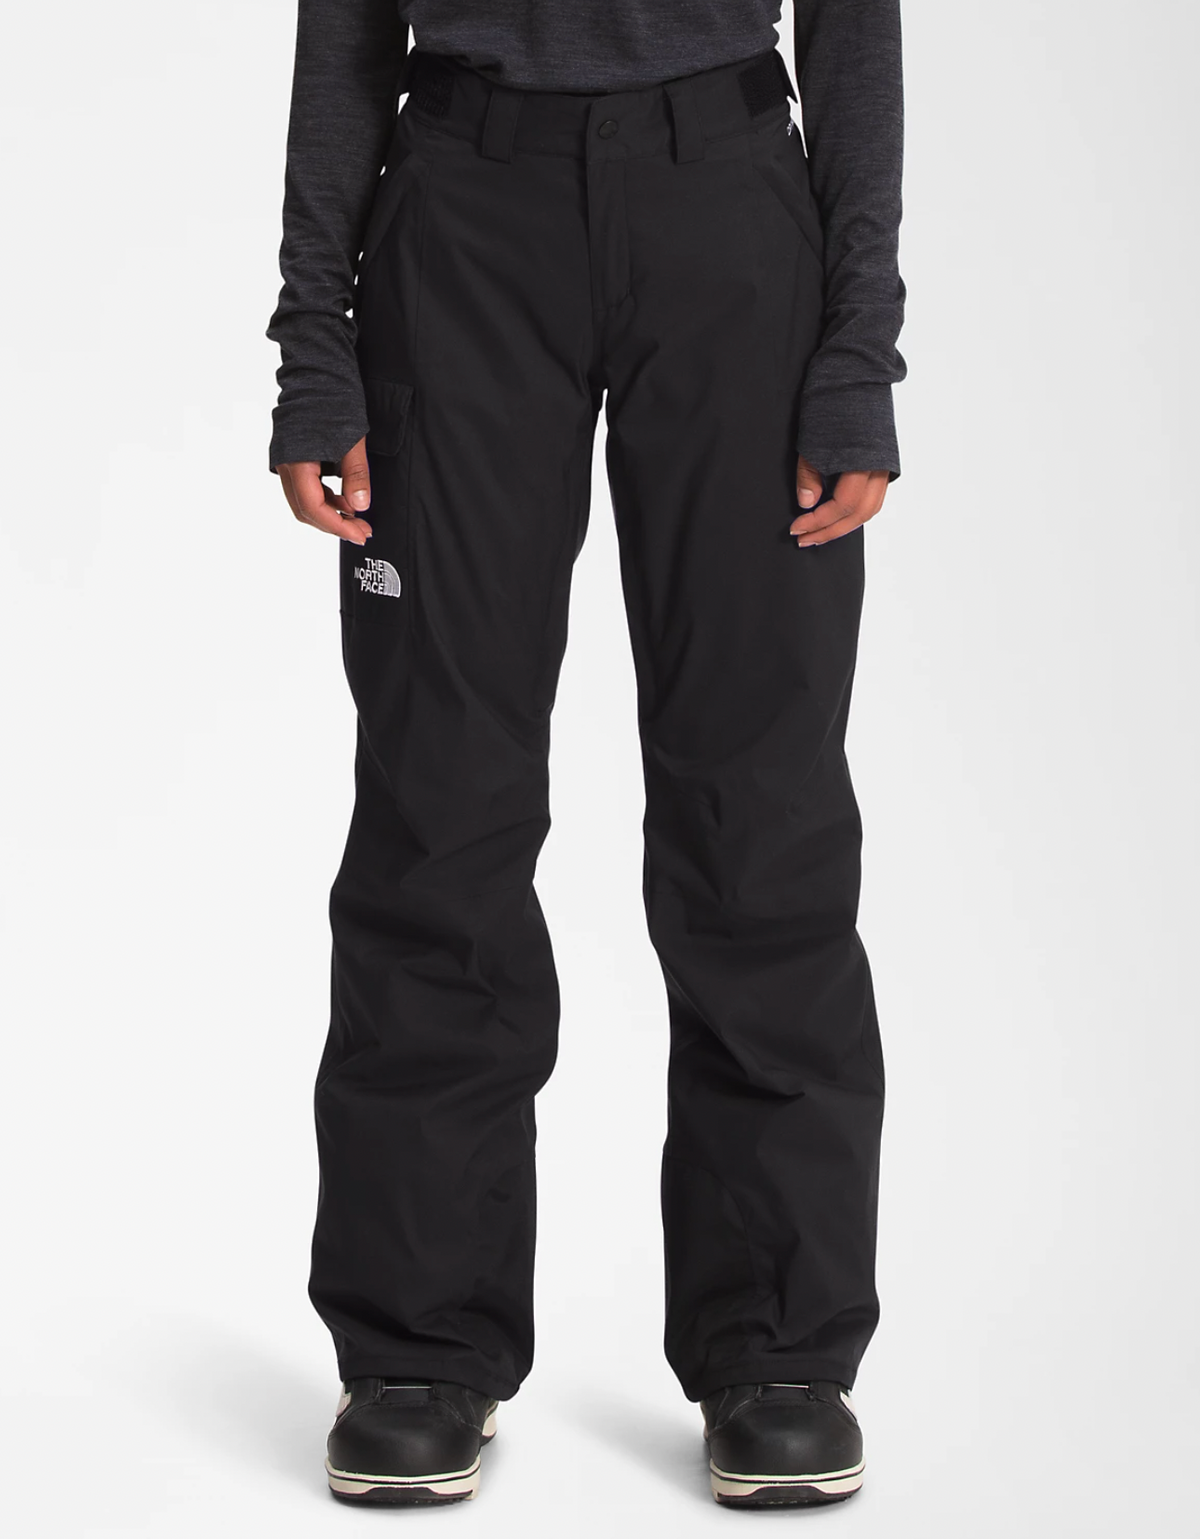 north face black insulated pants